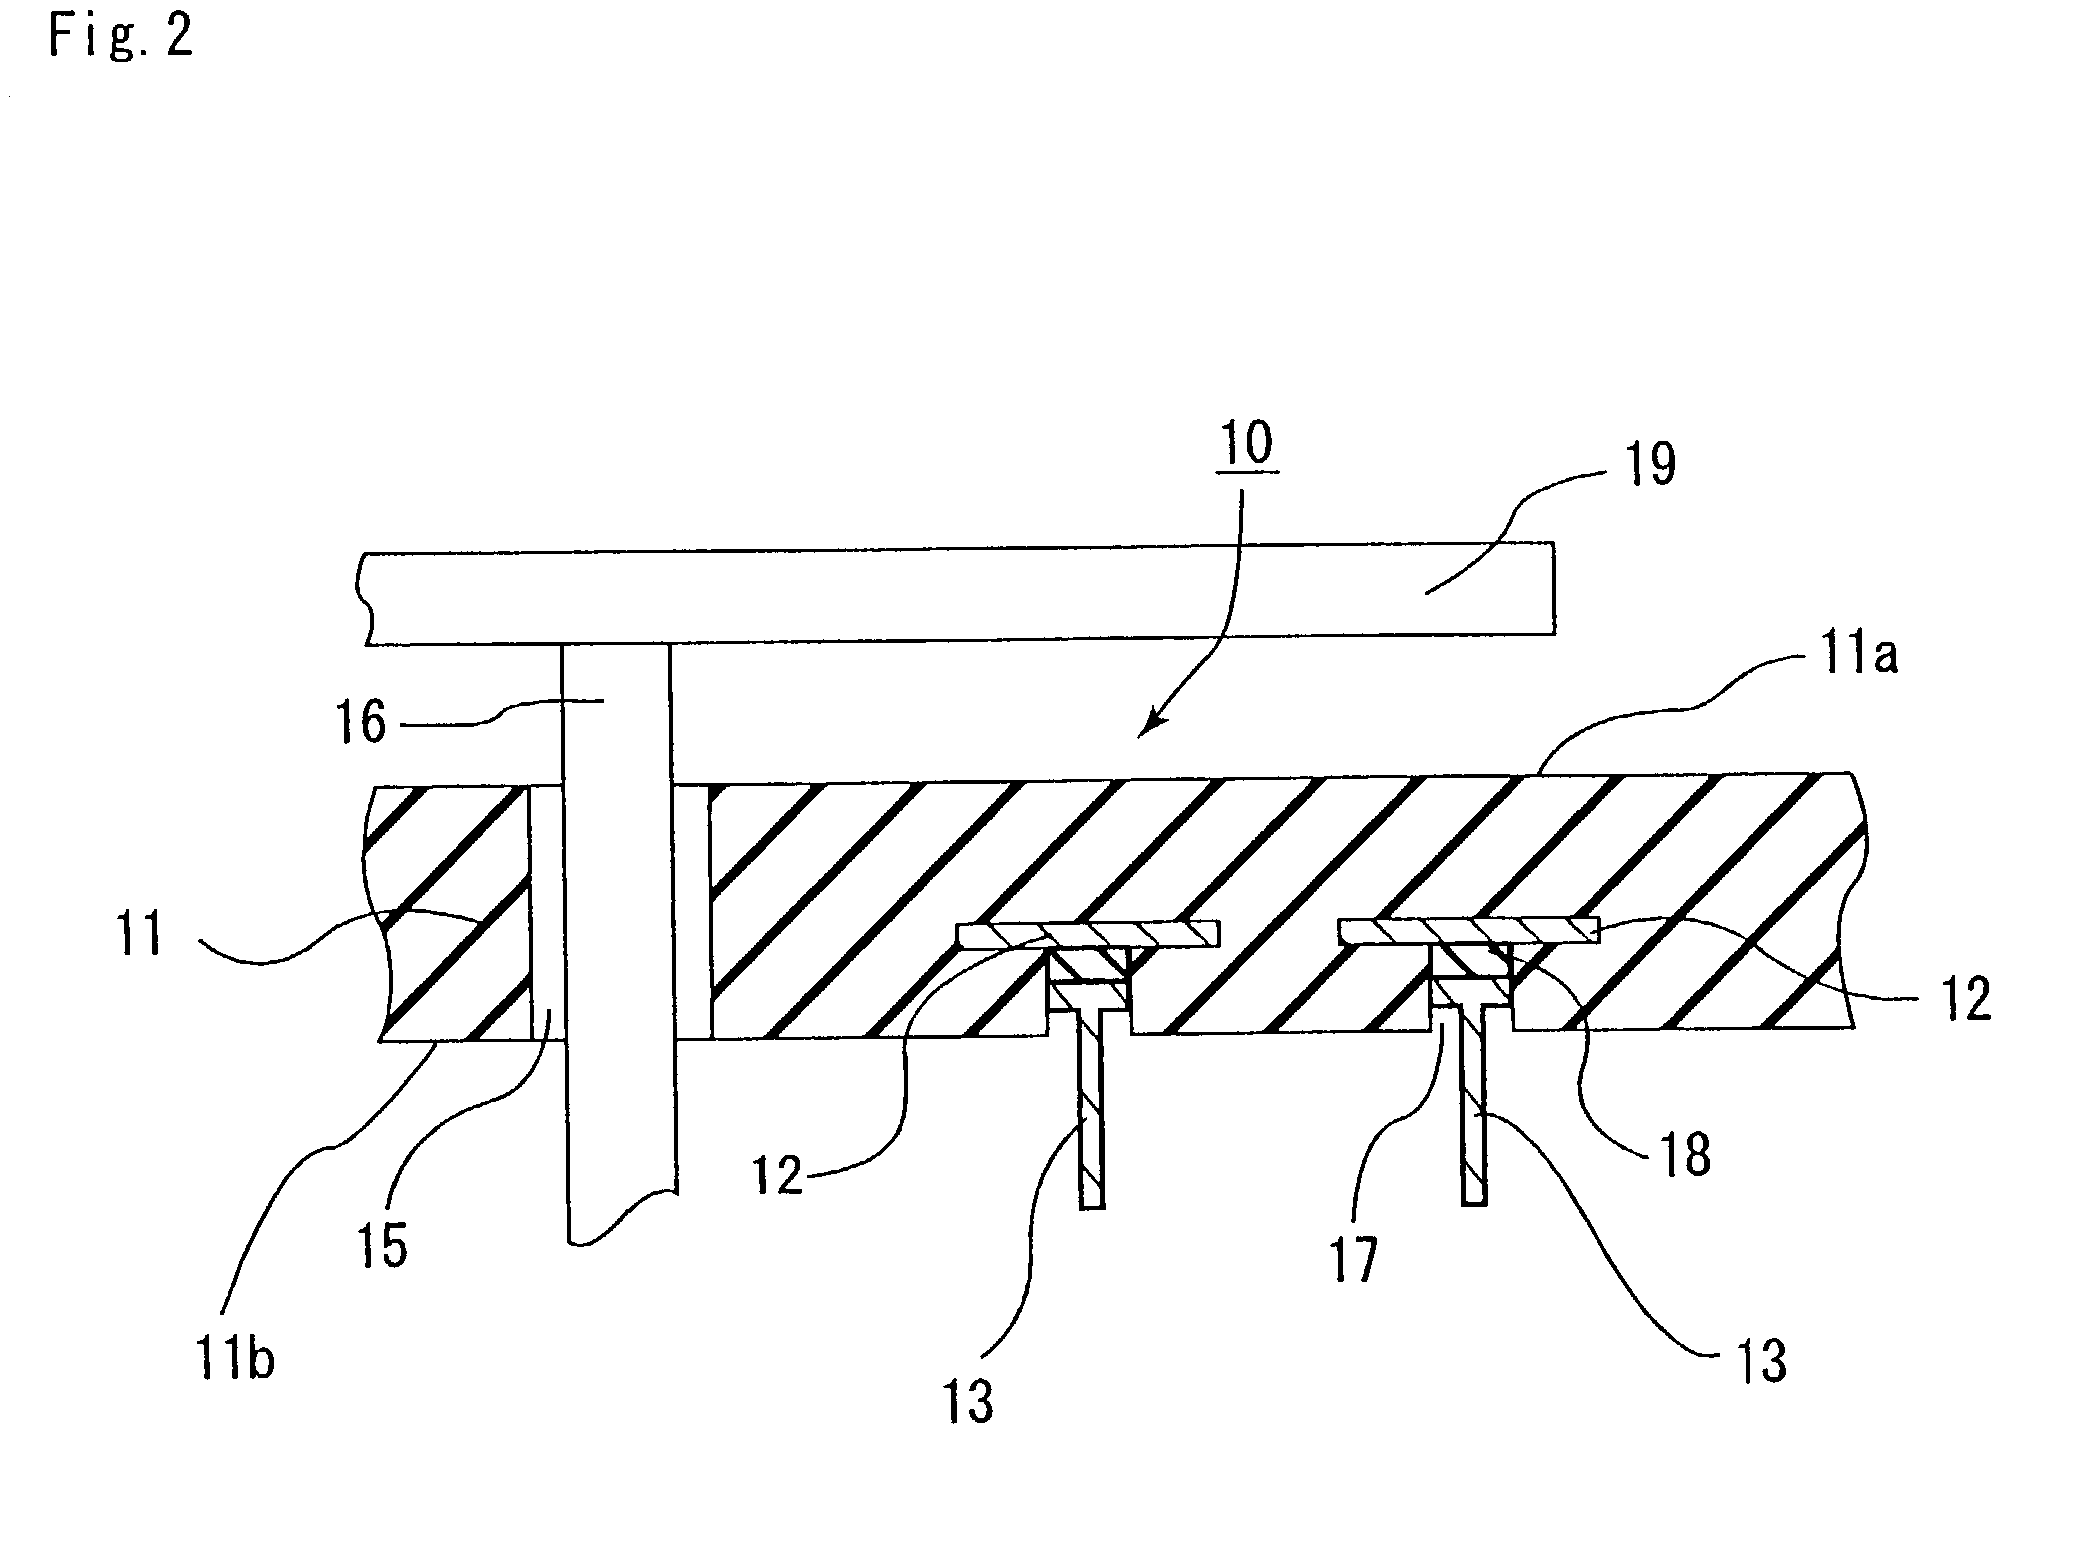 Ceramic substrate for semiconductor manufacture/inspection apparatus, ceramic heater, electrostatic clampless holder, and substrate for wafer prober